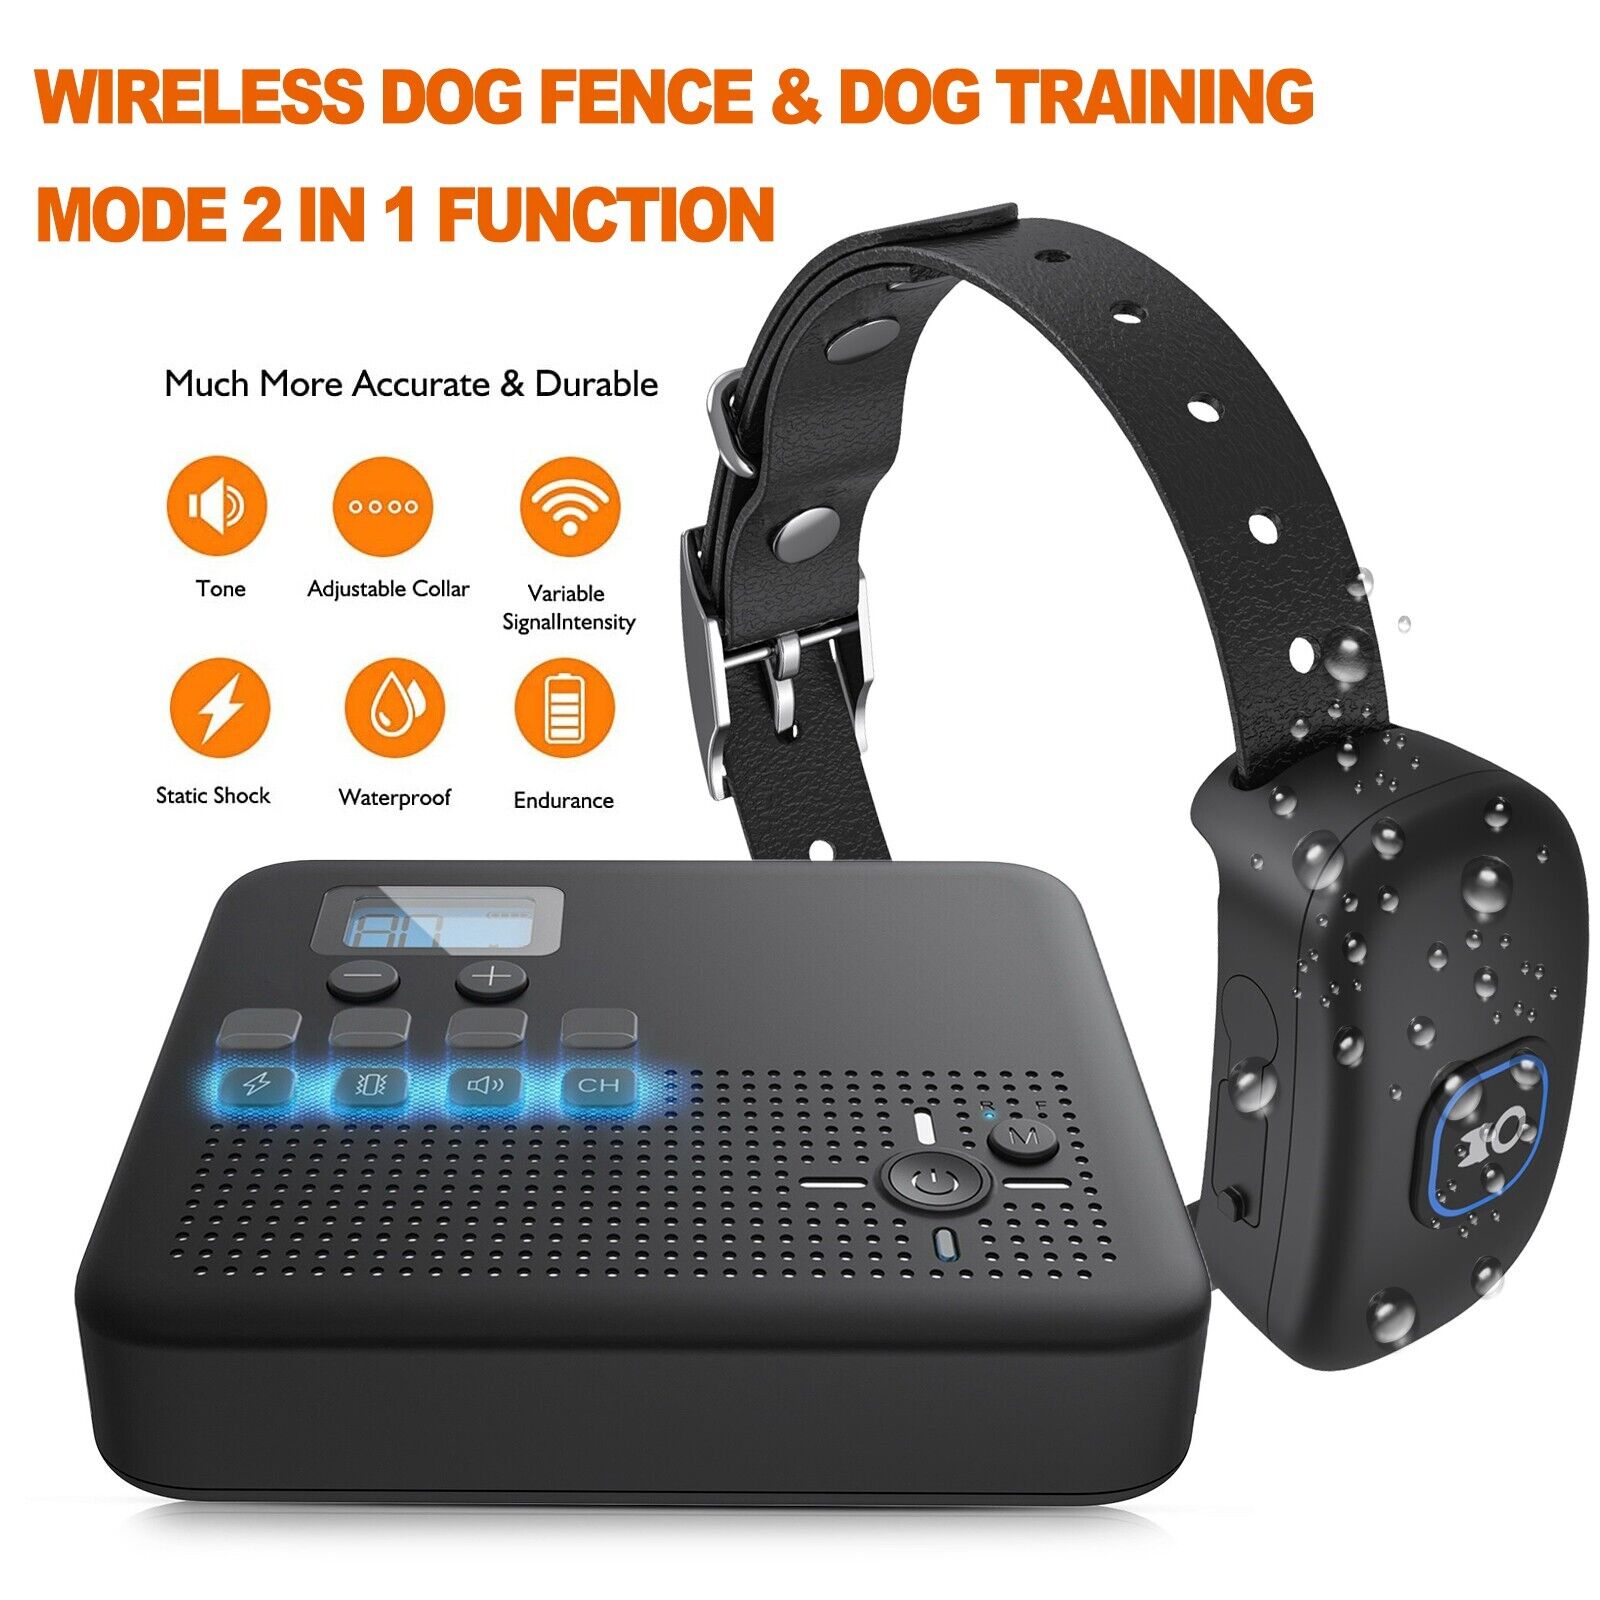 Remote Dog Shock Training Collar&Dog Fence Rechargeable Waterproof Pet Trainer